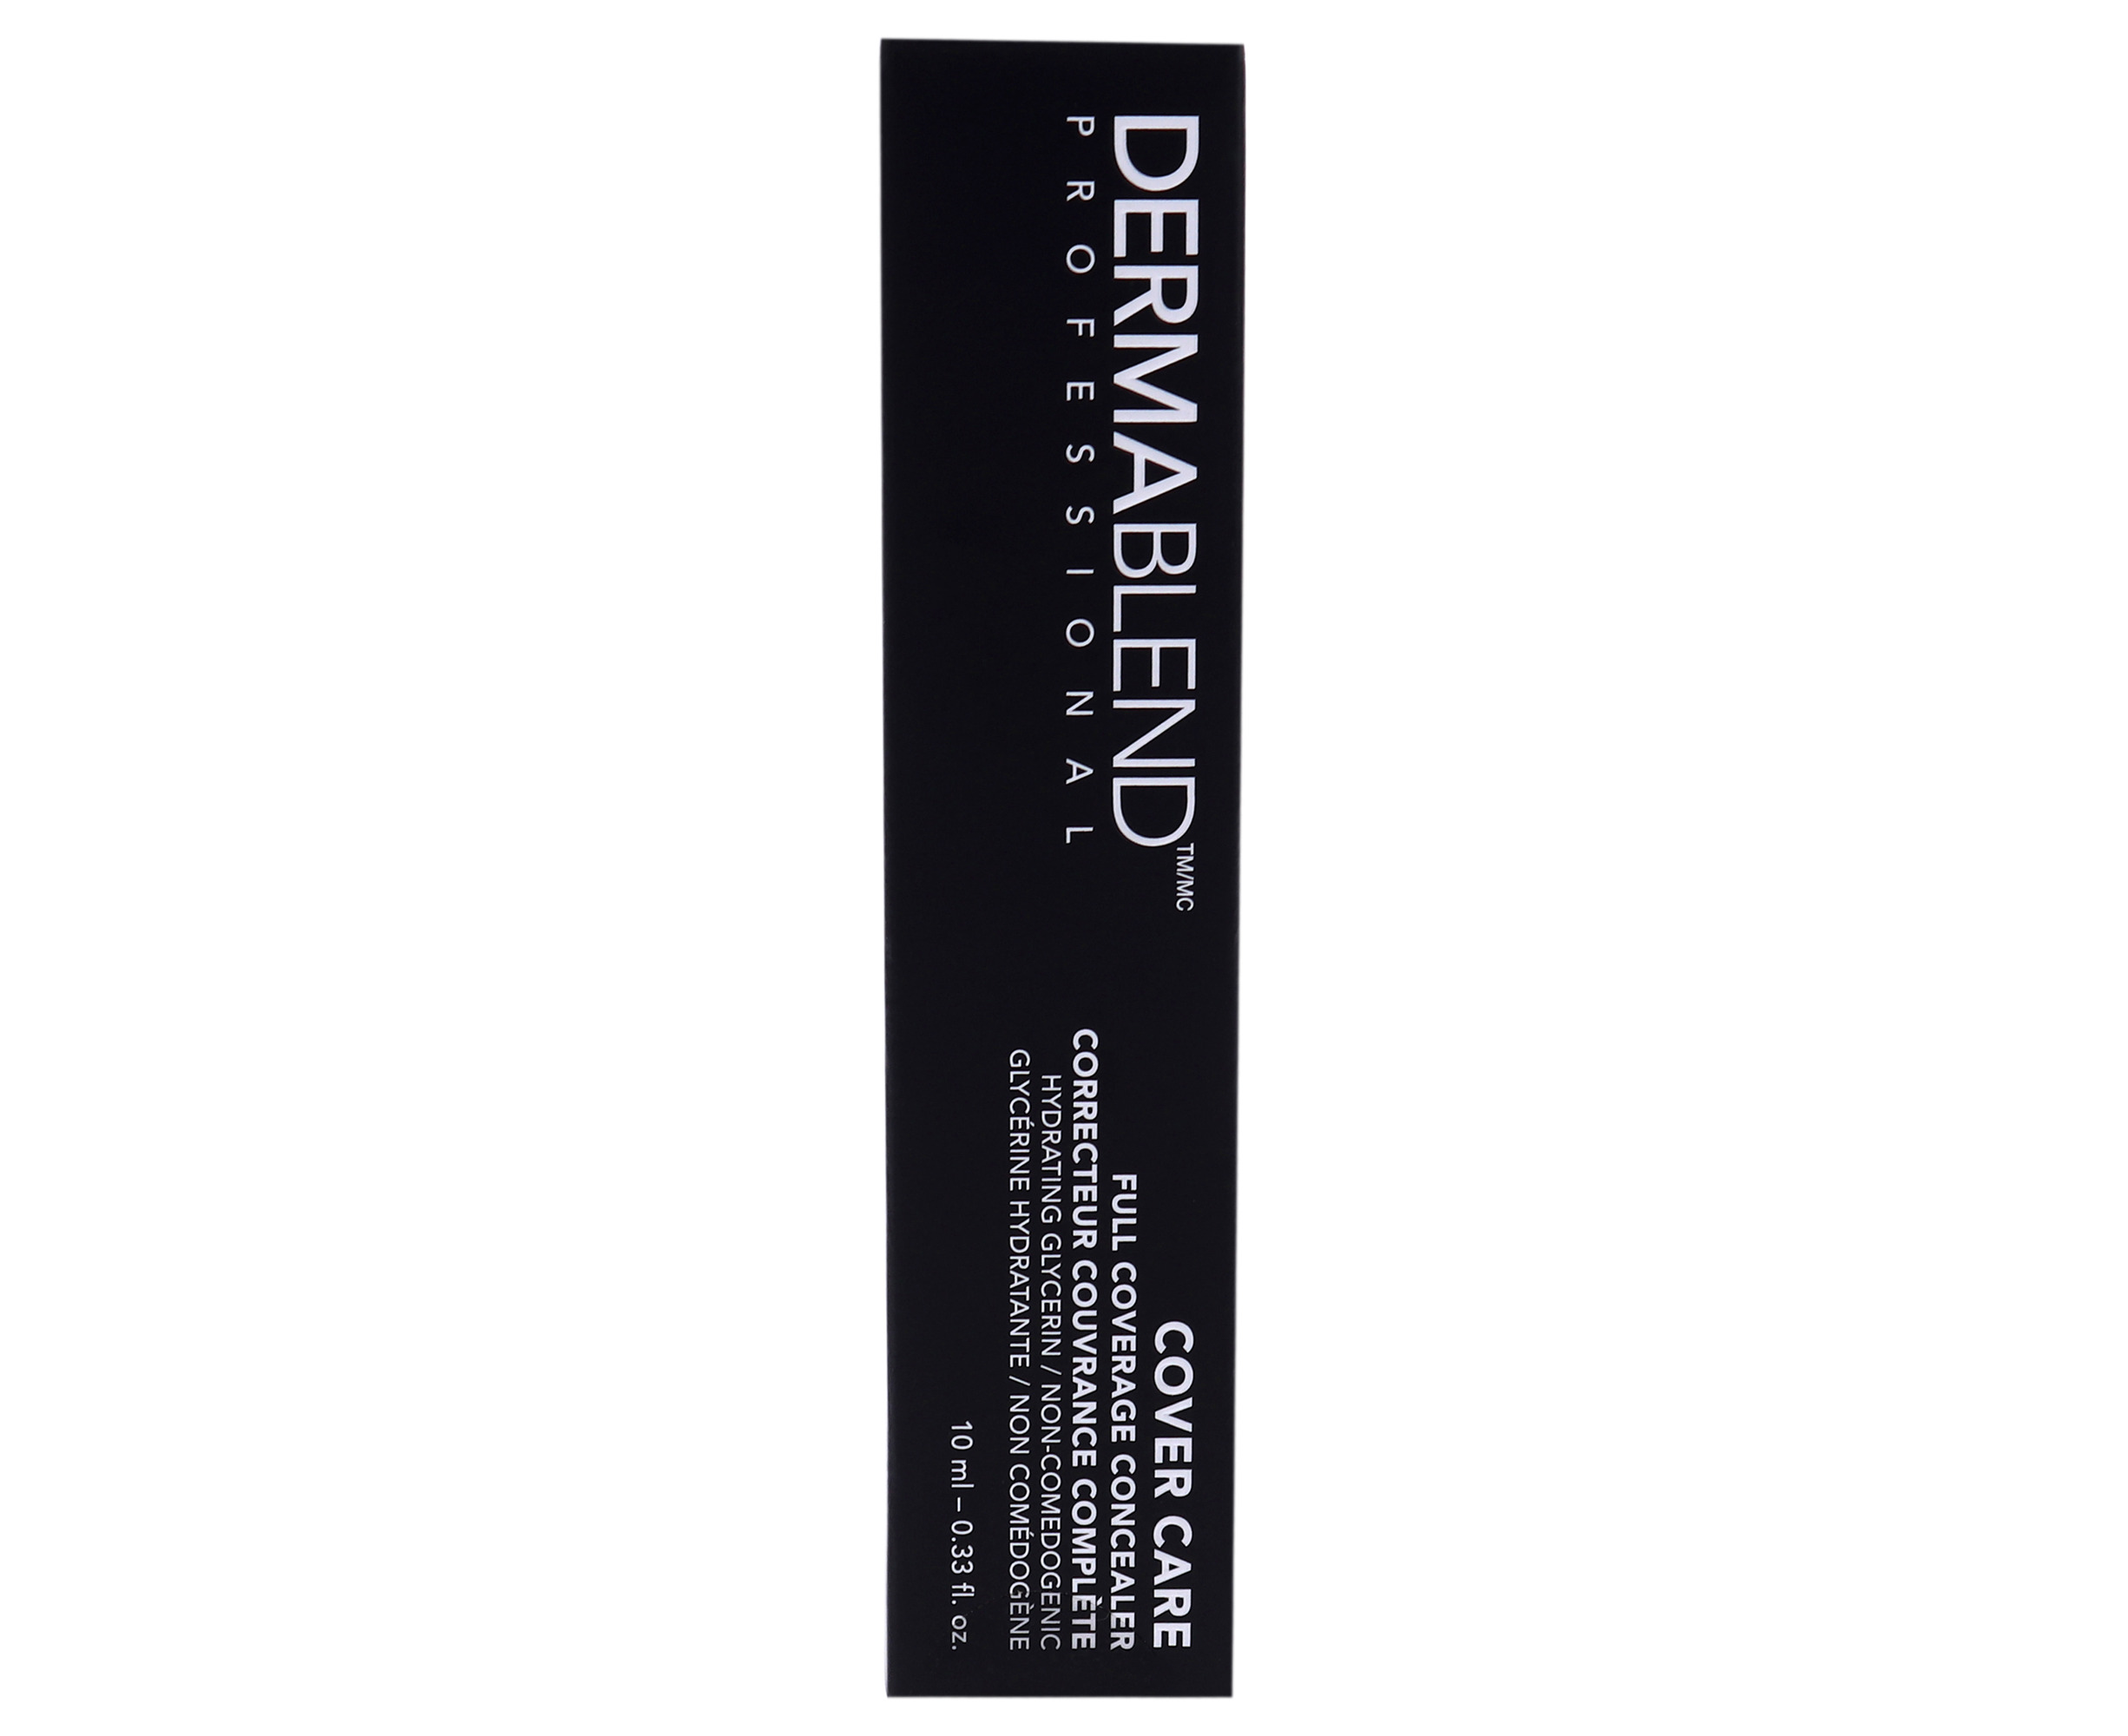 Amazon.com: Dermablend Quick-Fix Body Makeup Full Coverage Foundation  Stick, Water-Resistant Body Concealer for Imperfections & Tattoos, 0.42 Oz  : Beauty & Personal Care